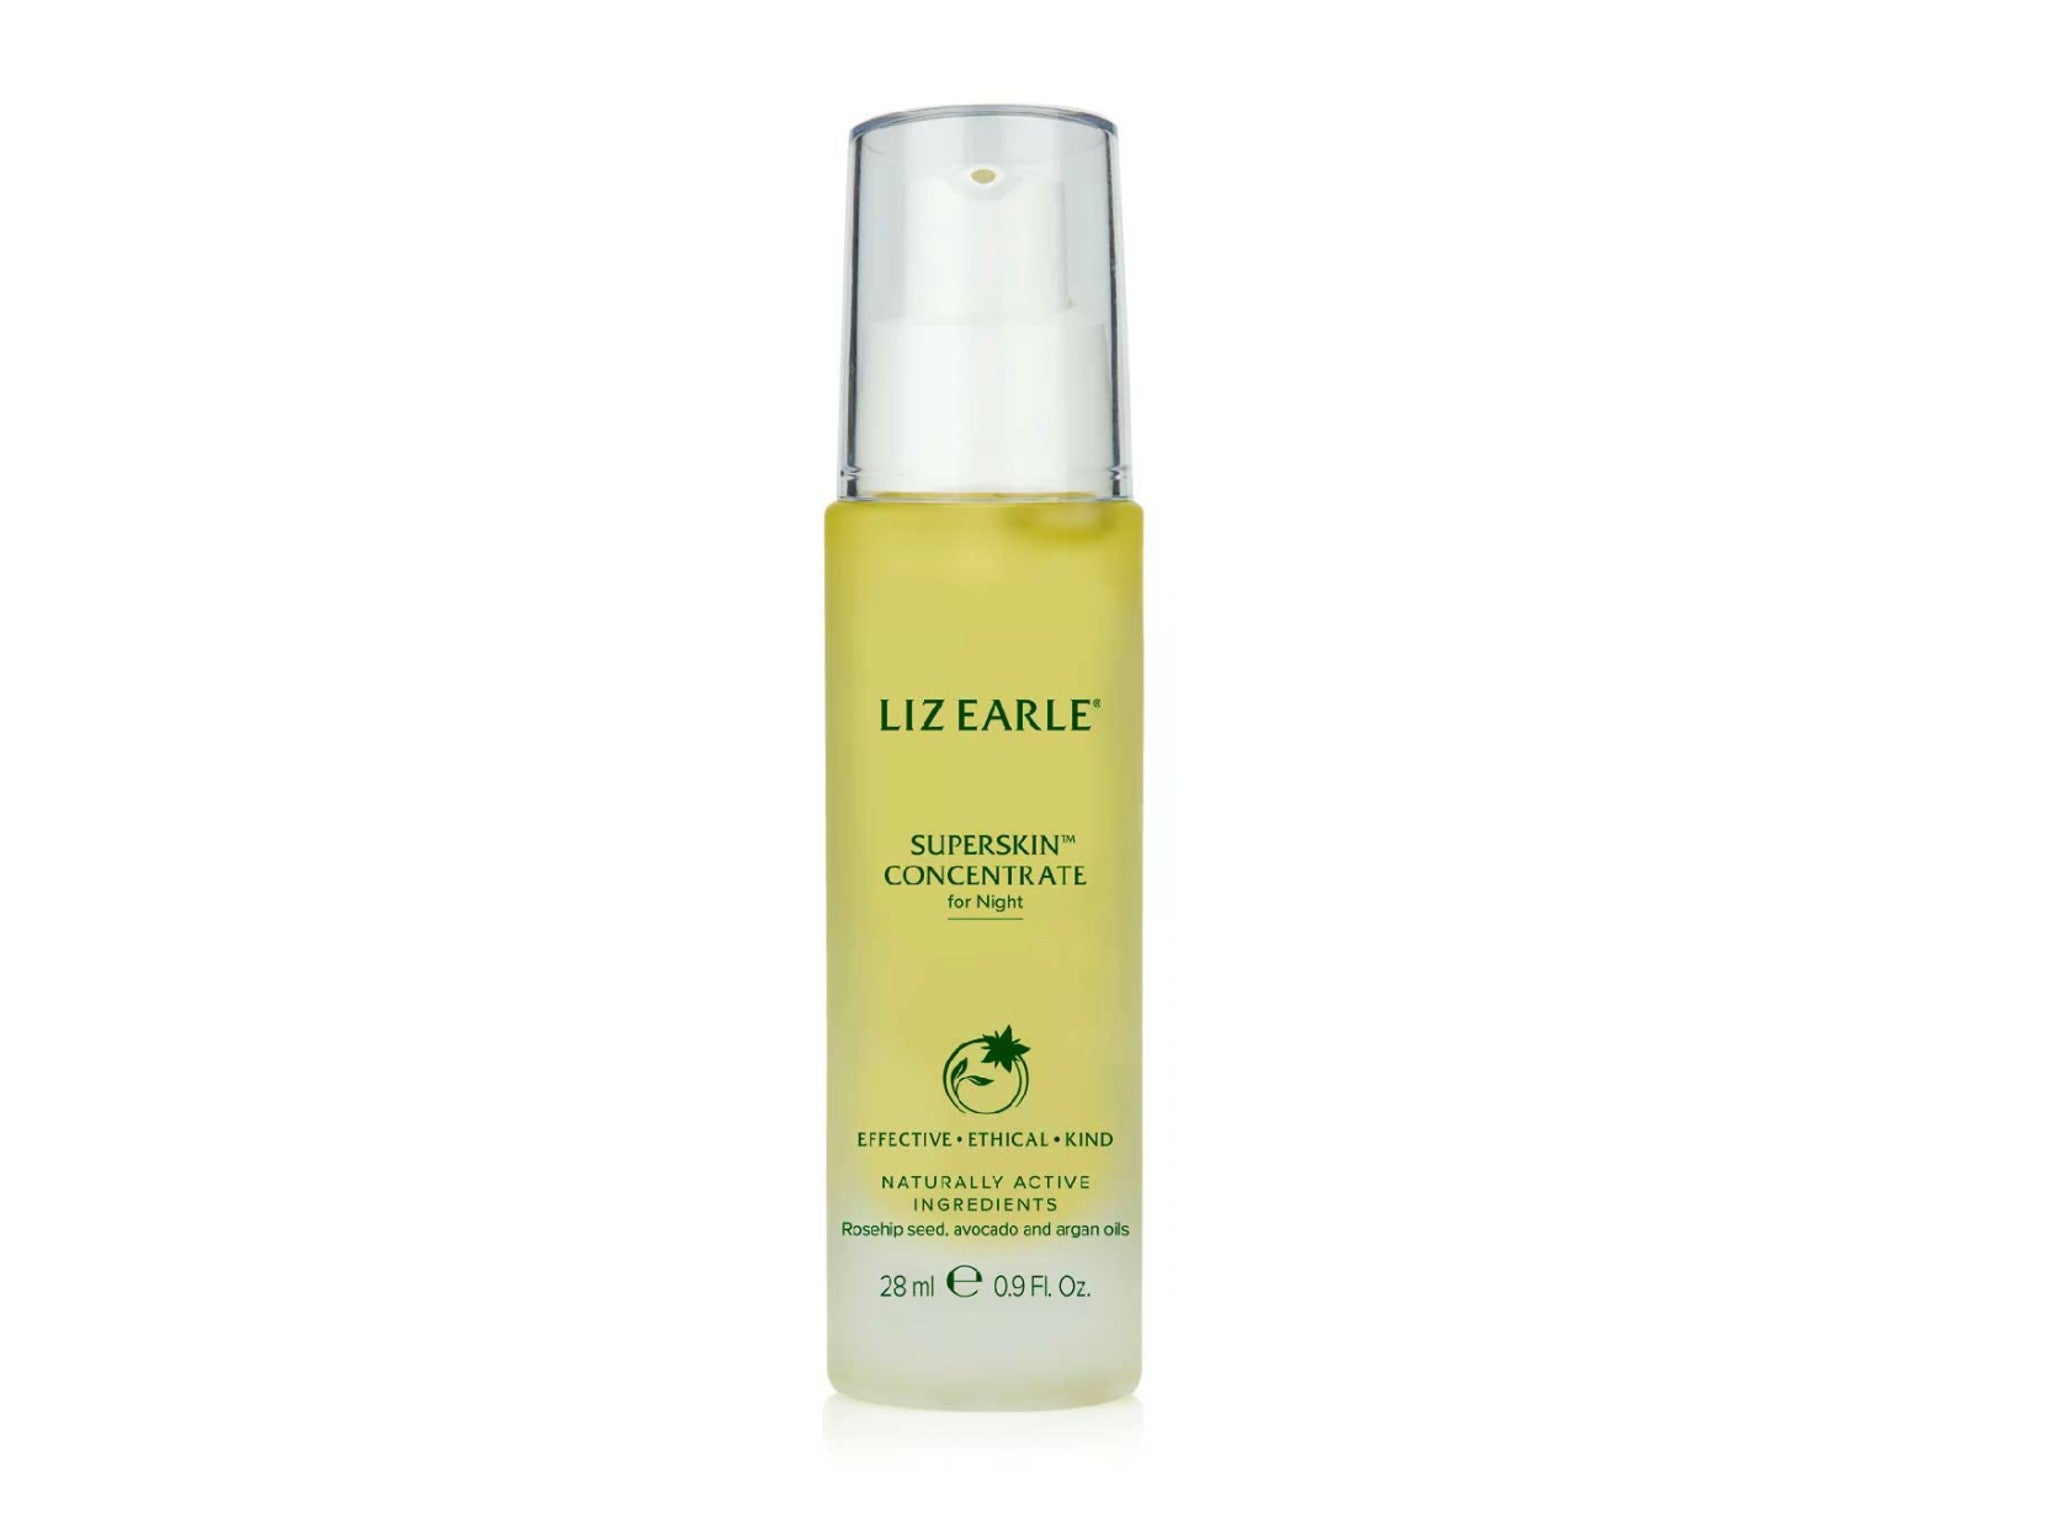 Liz Earle superskin cocnentrate for night